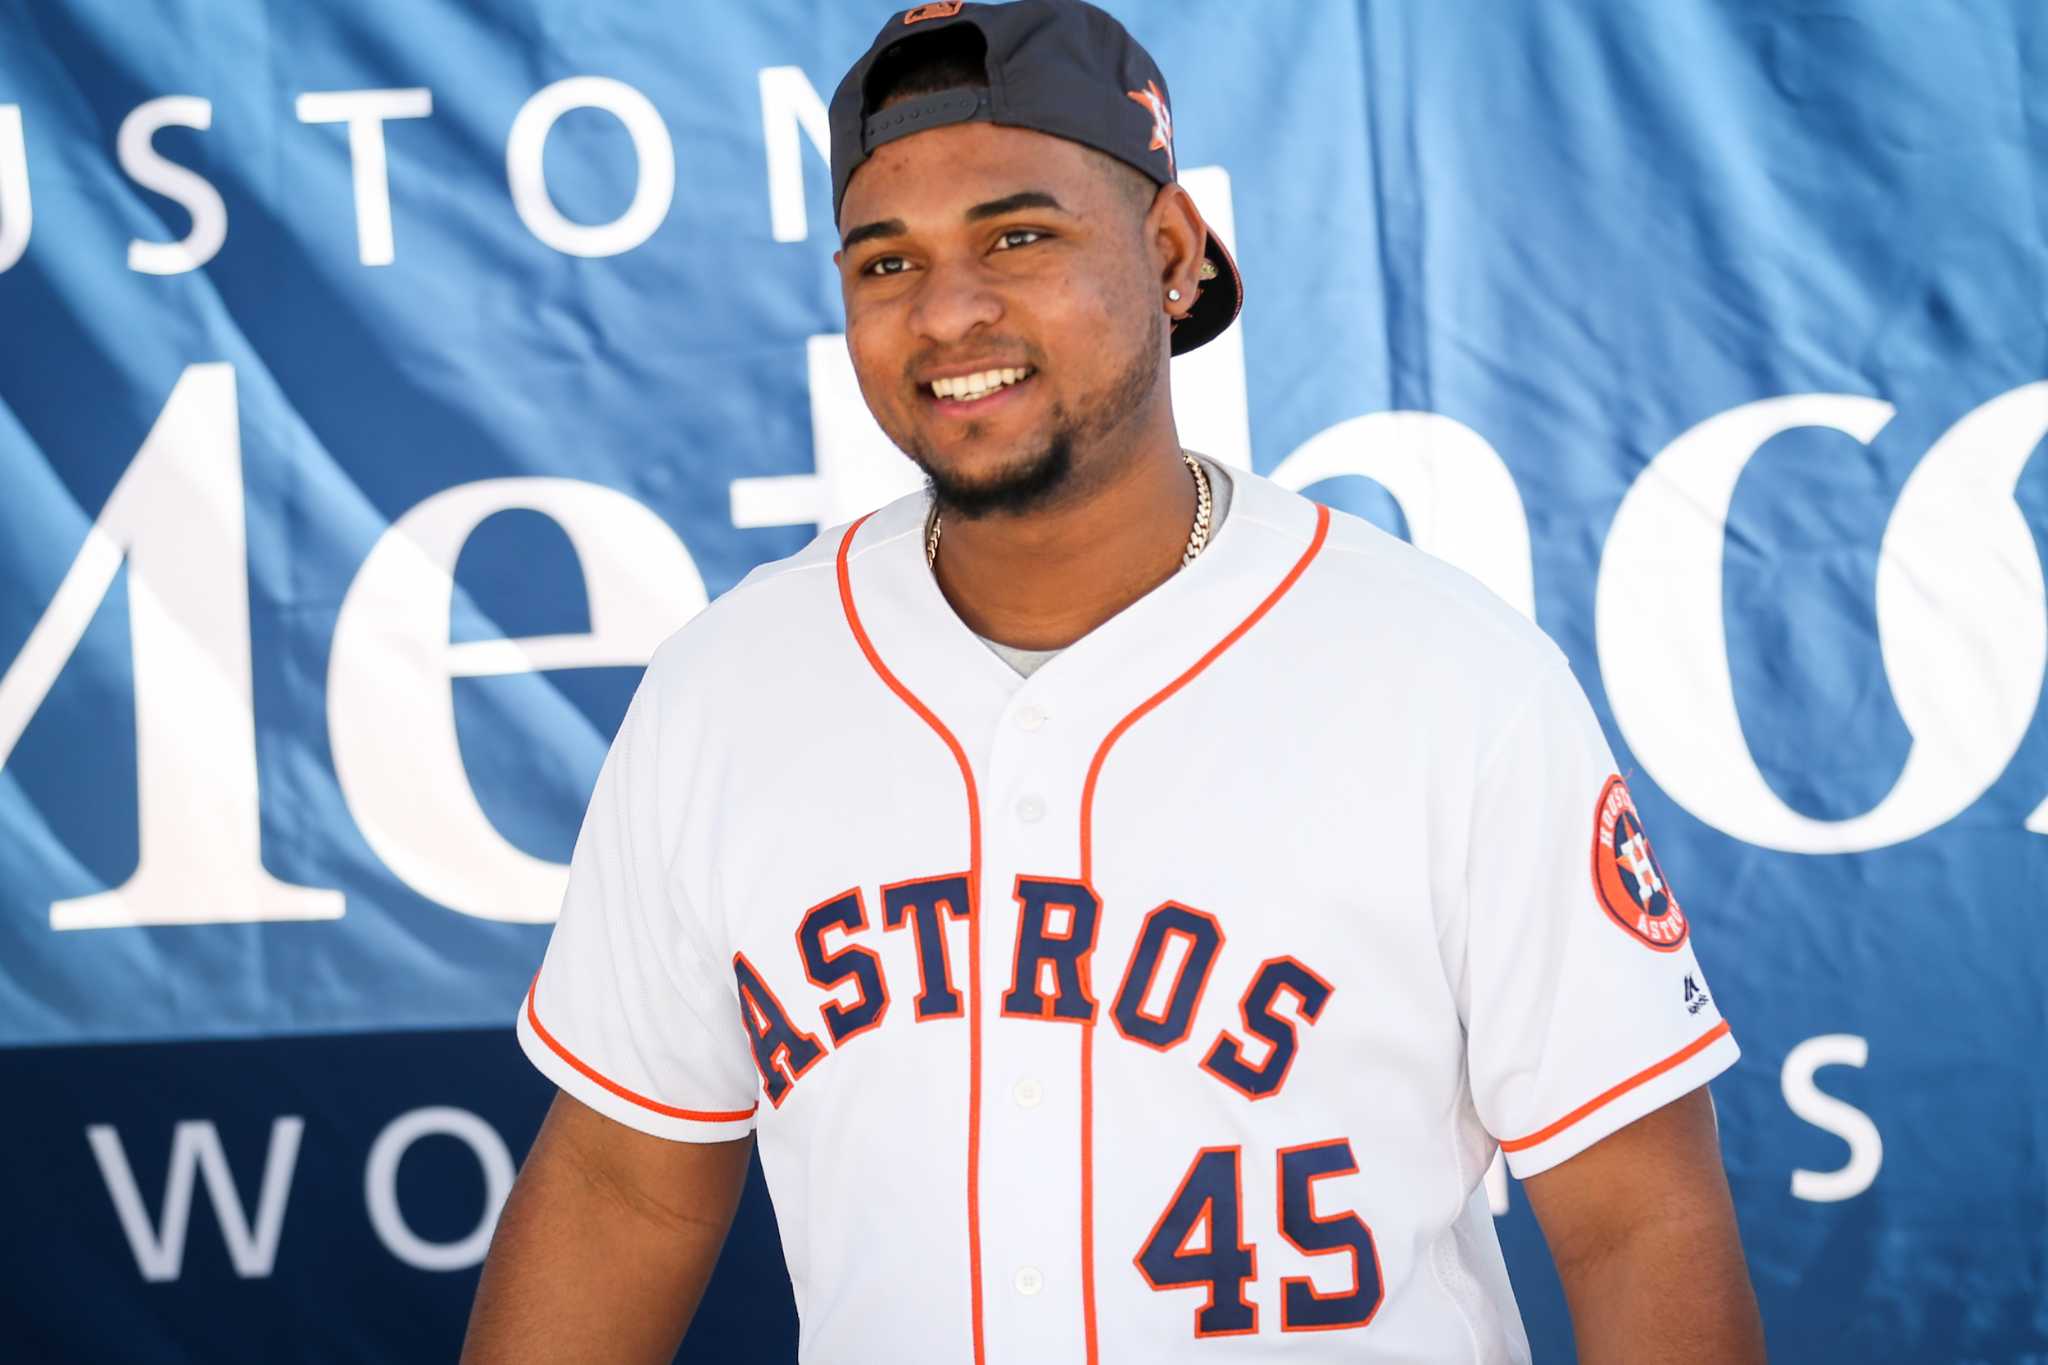 How Astros players spent their offseason, according to Instagram